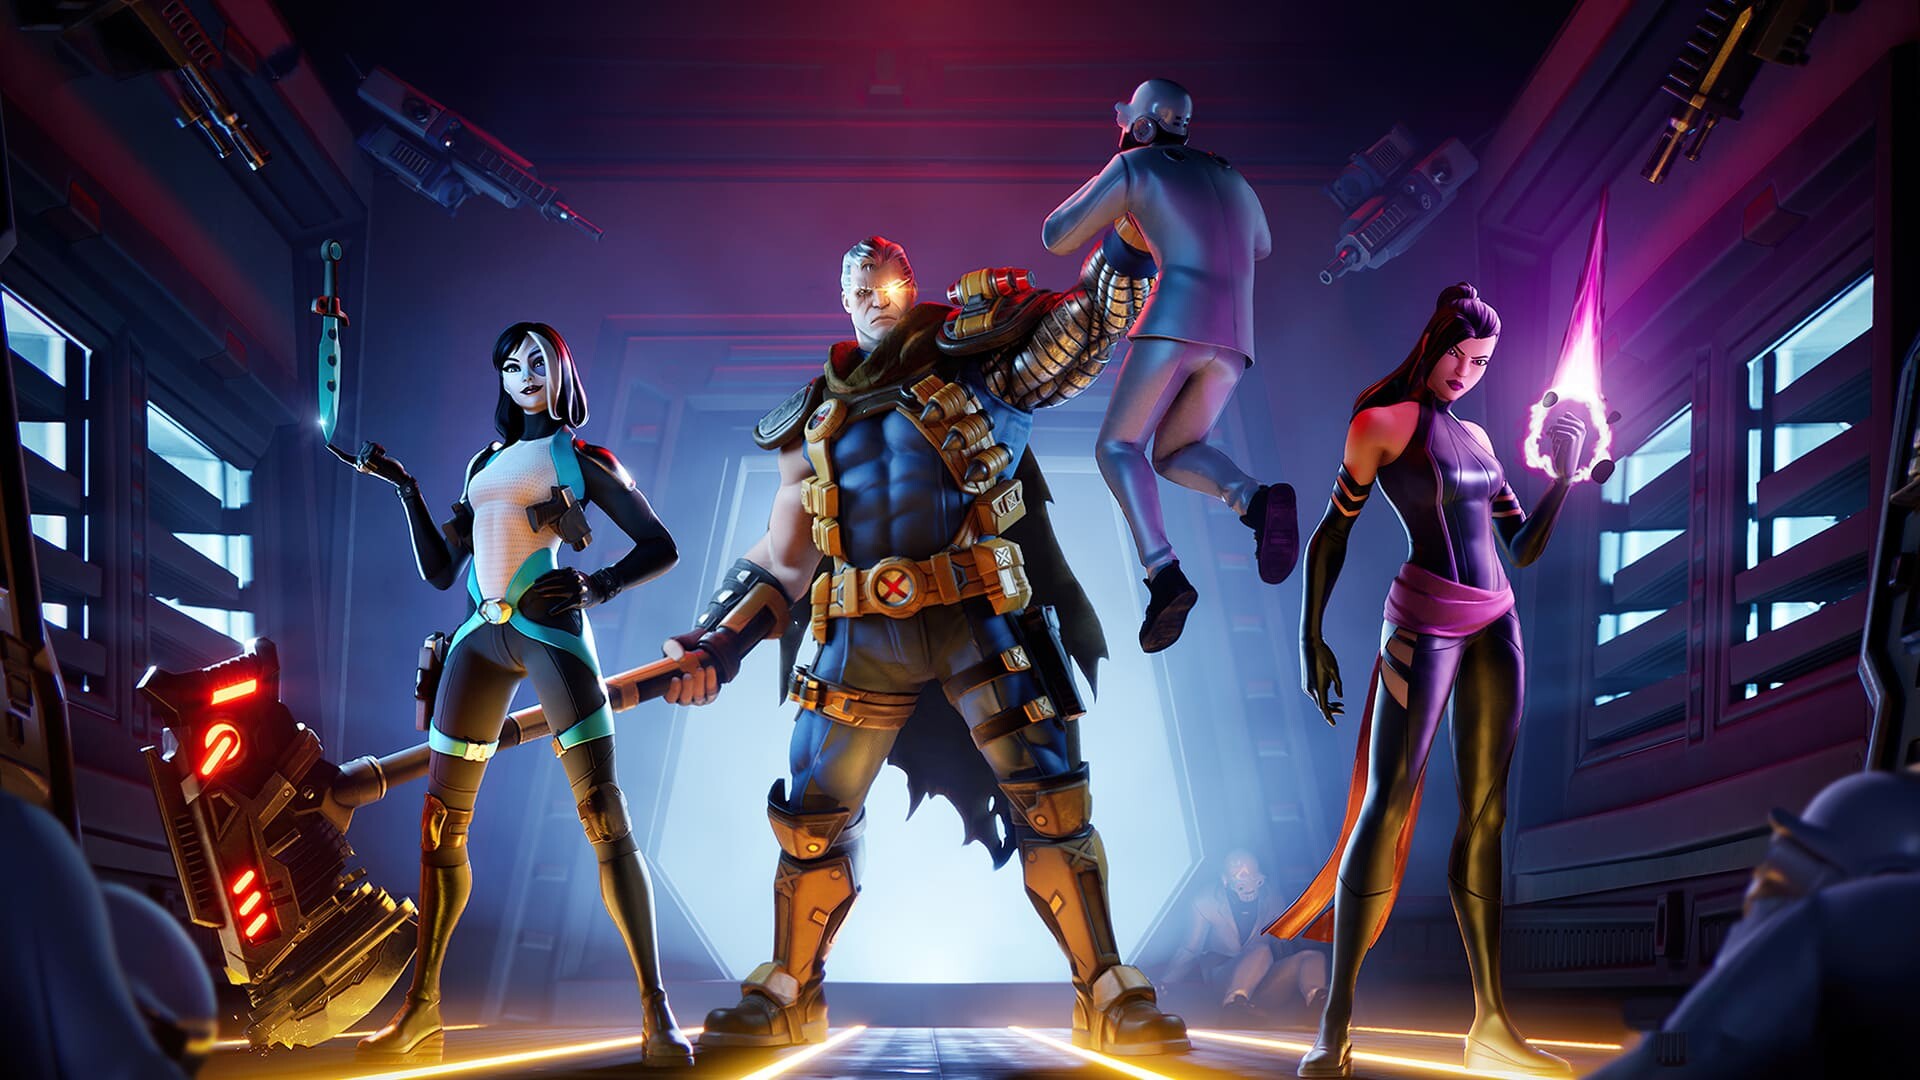 Fortnite: A cooperative online game, Developed by Epic Games. 1920x1080 Full HD Wallpaper.